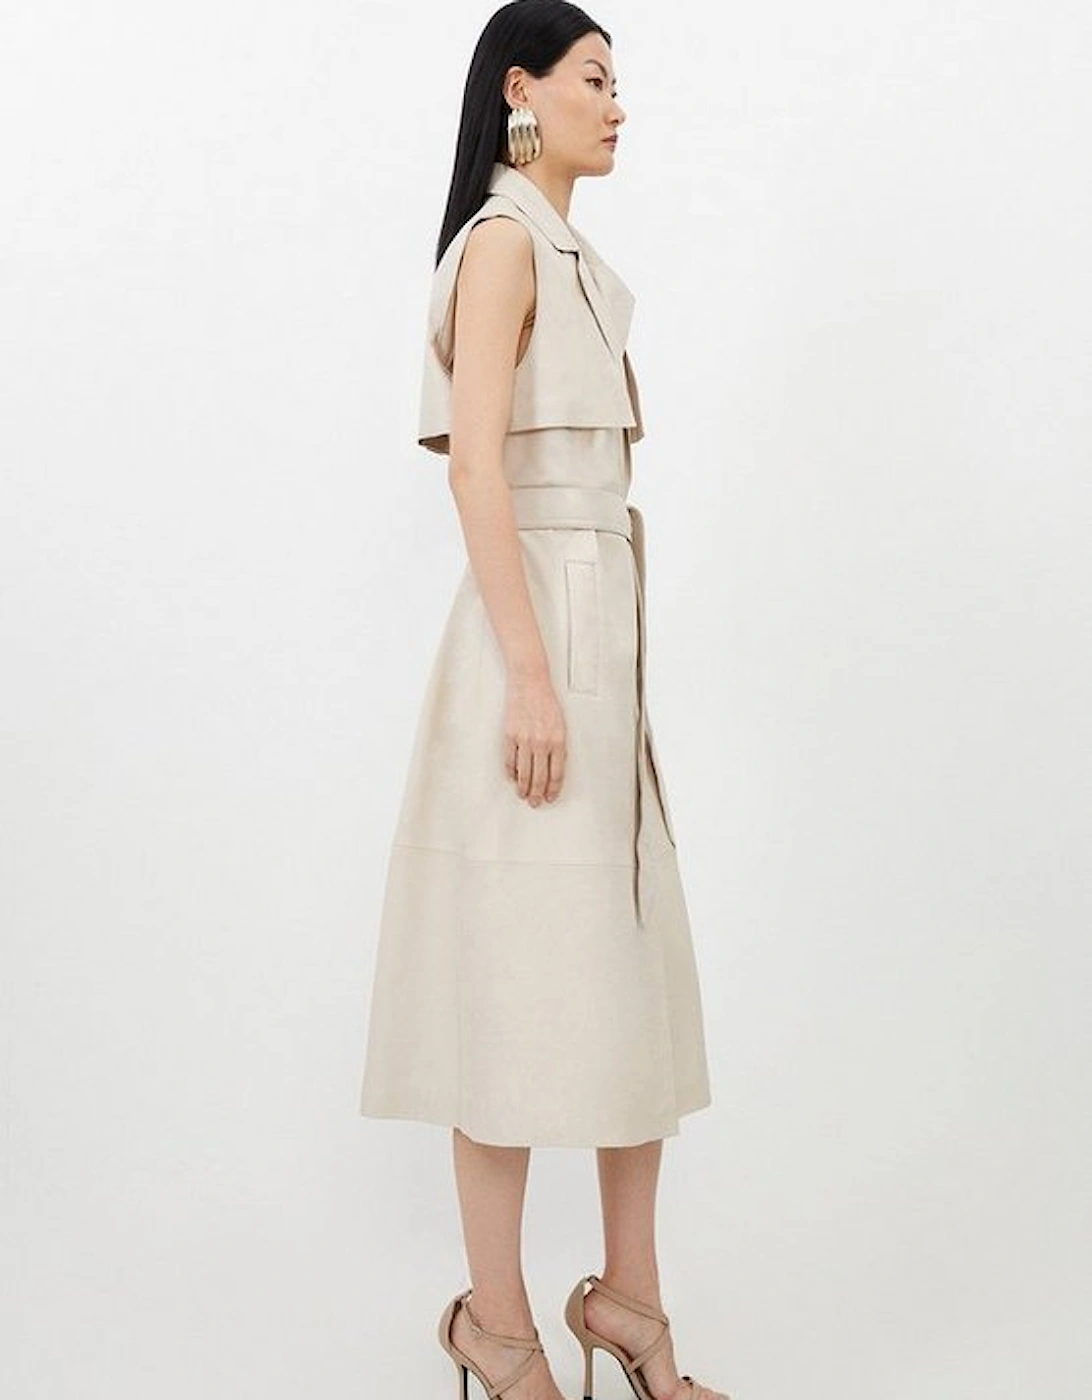 Leather Sleeveless Belted Storm Flap Detail Trench Coat